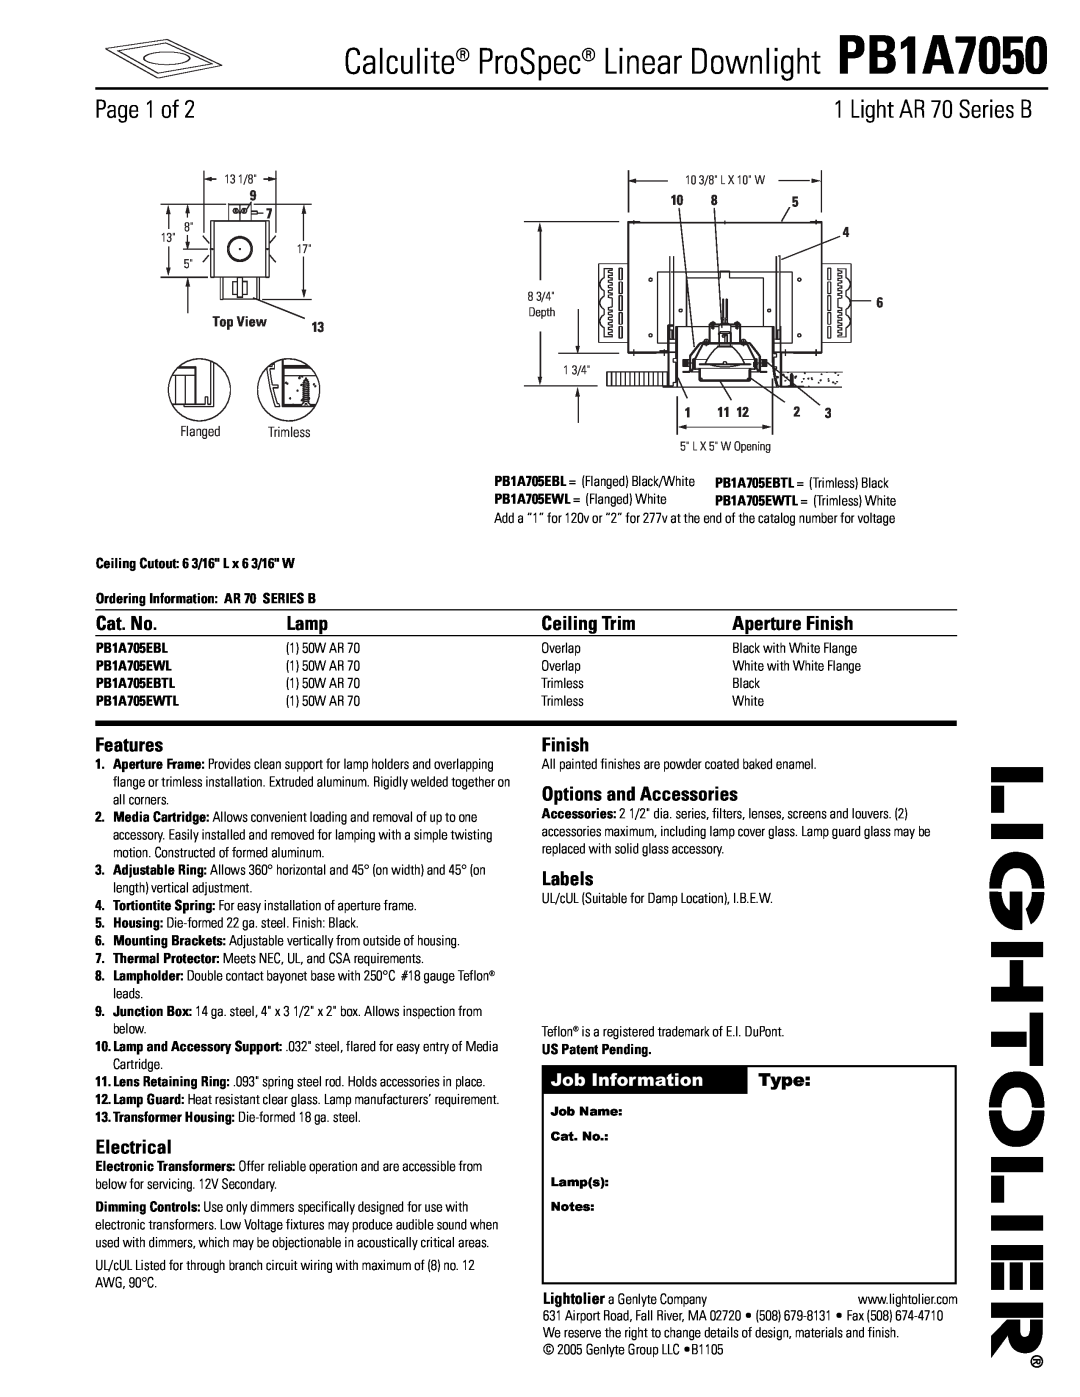 Lightolier manual Calculite ProSpec Linear Downlight PB1A7050, Page 1 of, Light AR 70 Series B, Cat. No, Lamp, Features 